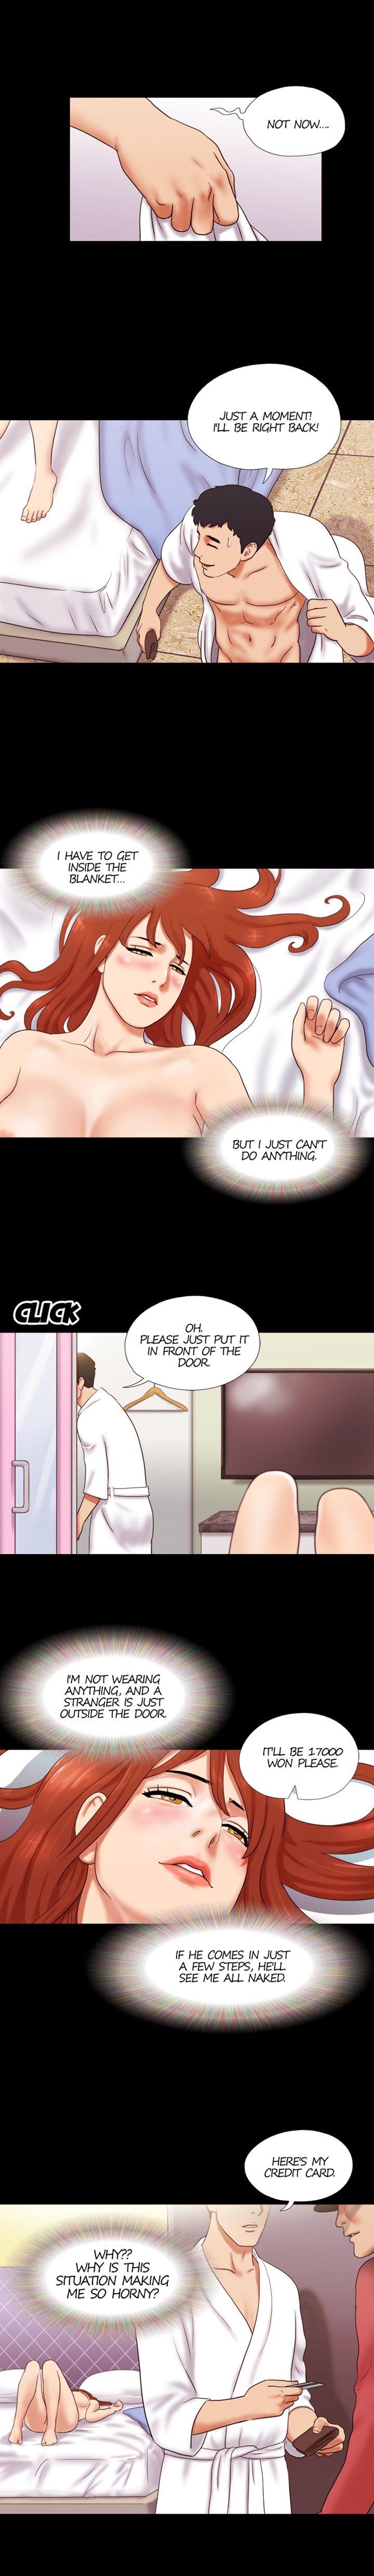 [Mulduck] Couple Game: 17 Sex Fantasies Ver.2 - Ch.01 - 20 [English] 72